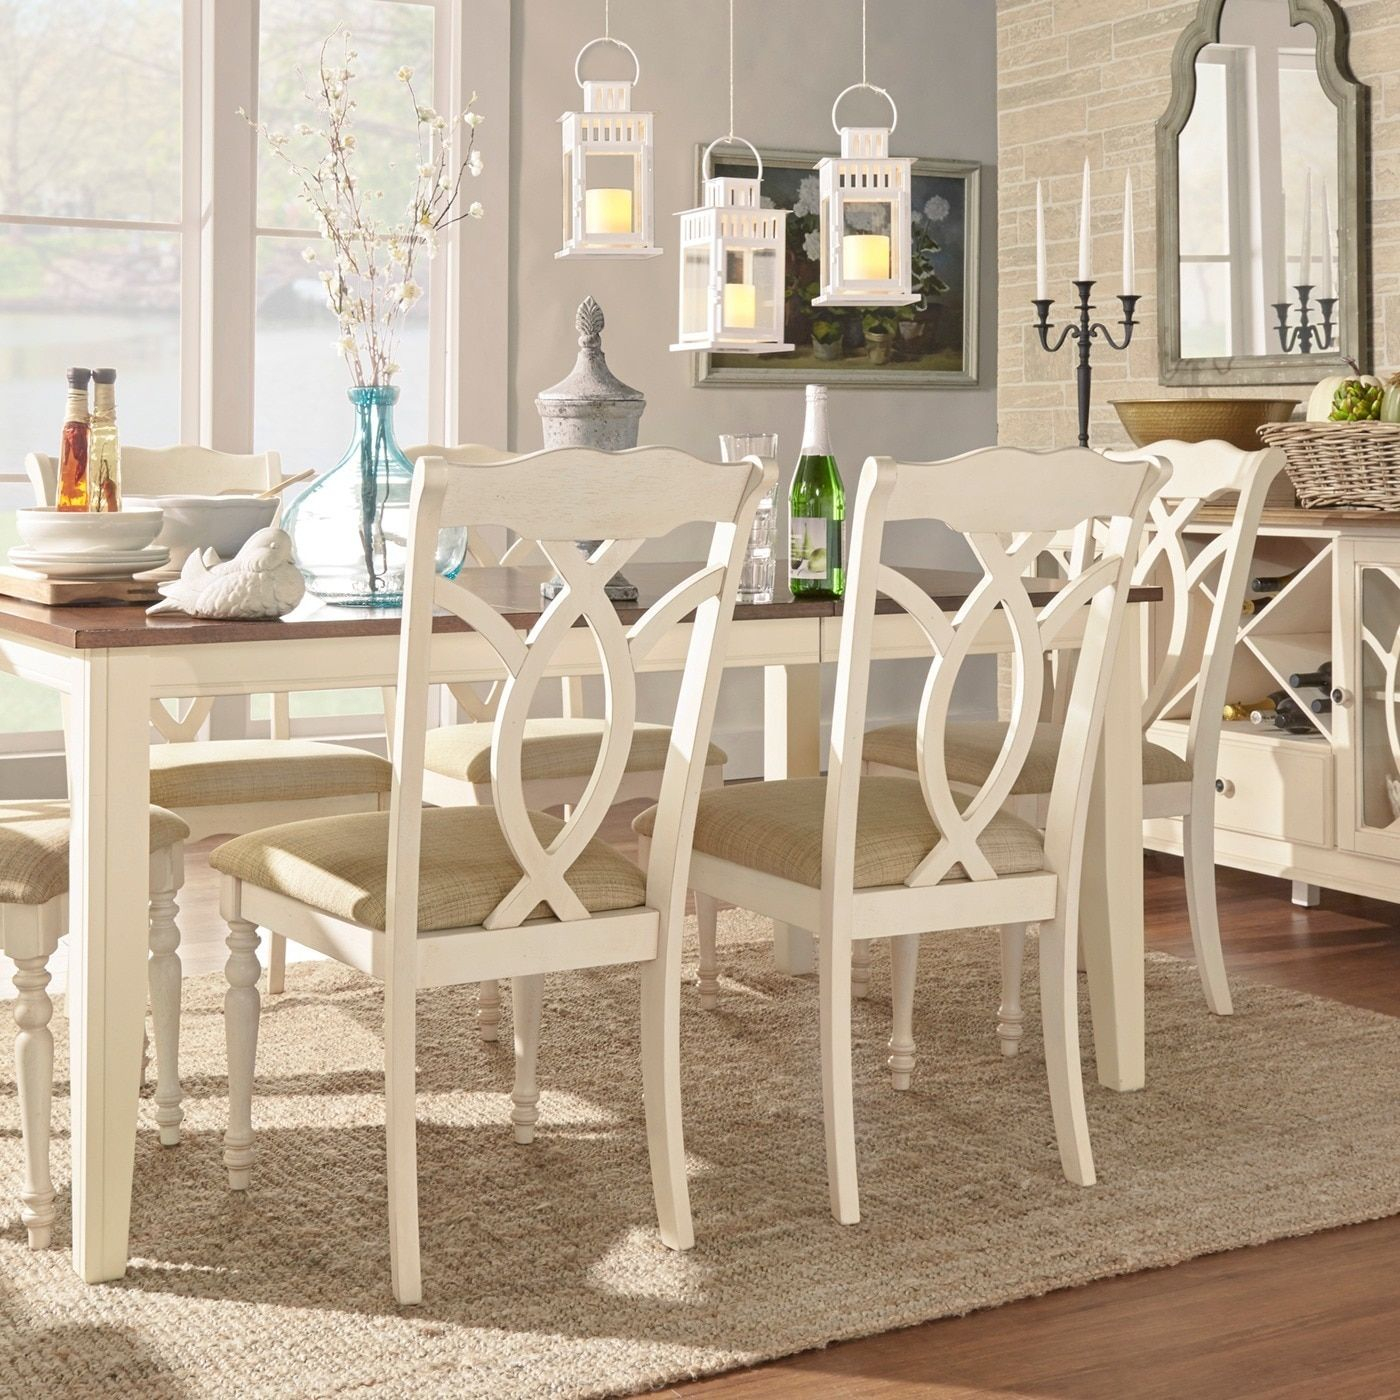 Shayne Country Antique White Beige Dining Chairs Set Of 2 regarding measurements 1400 X 1400